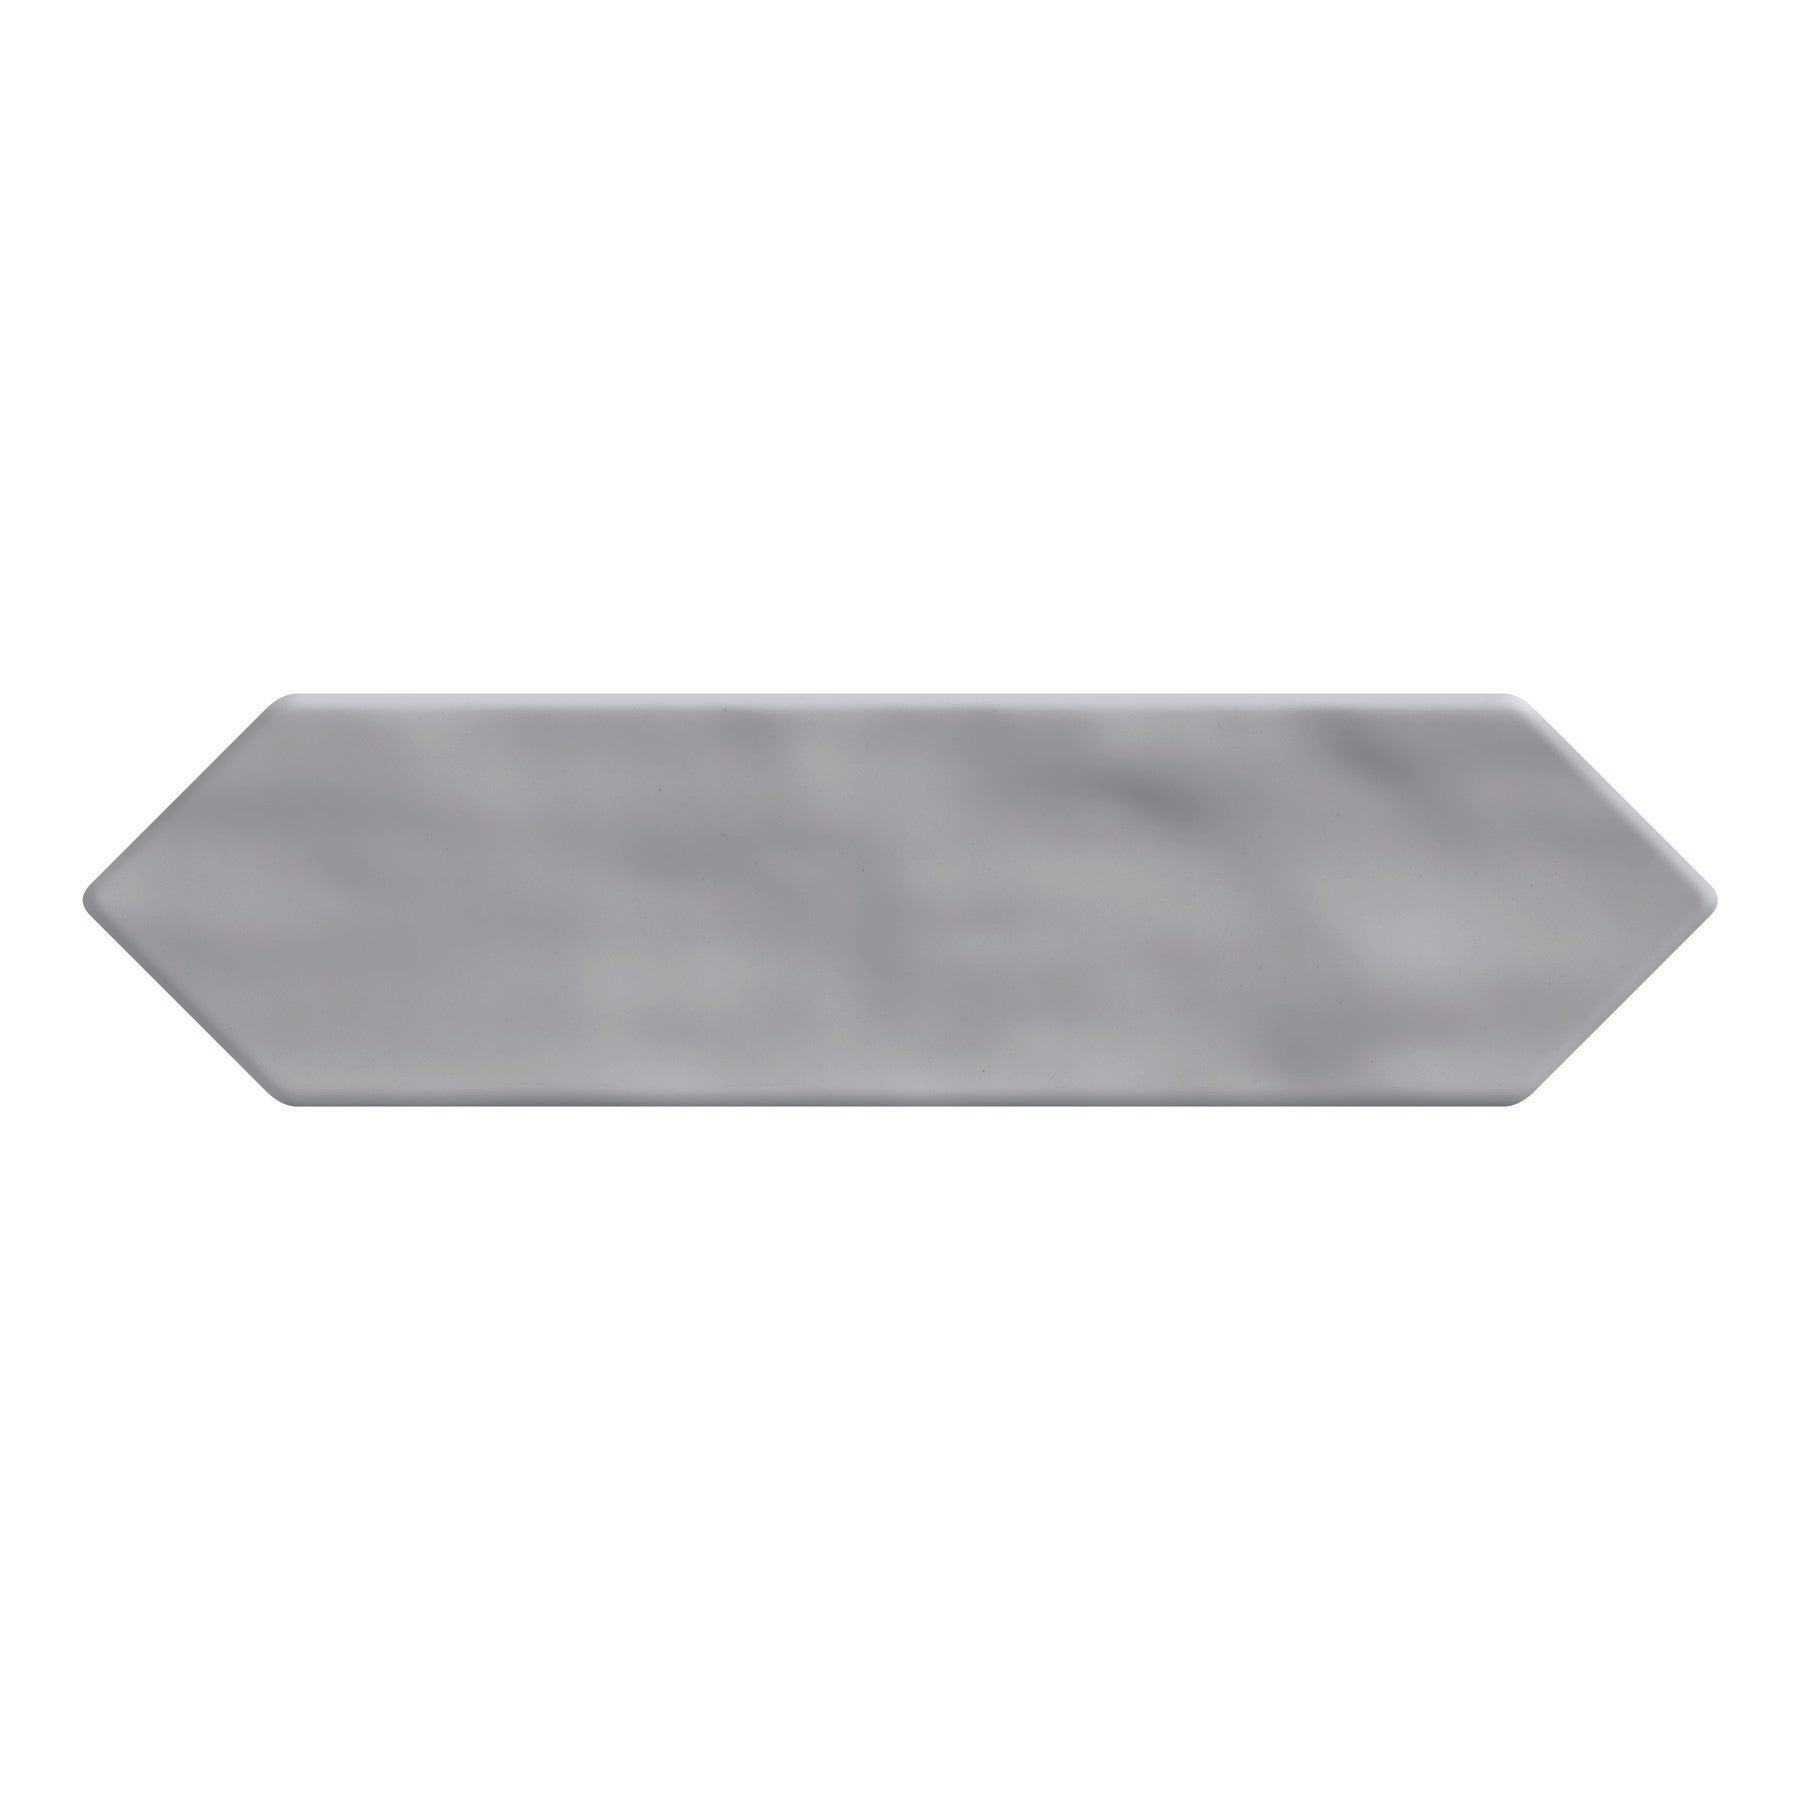 Daltile - Stagecraft - 3 in. x 12 in. Picket Wall Tile - Matte Desert Gray X714